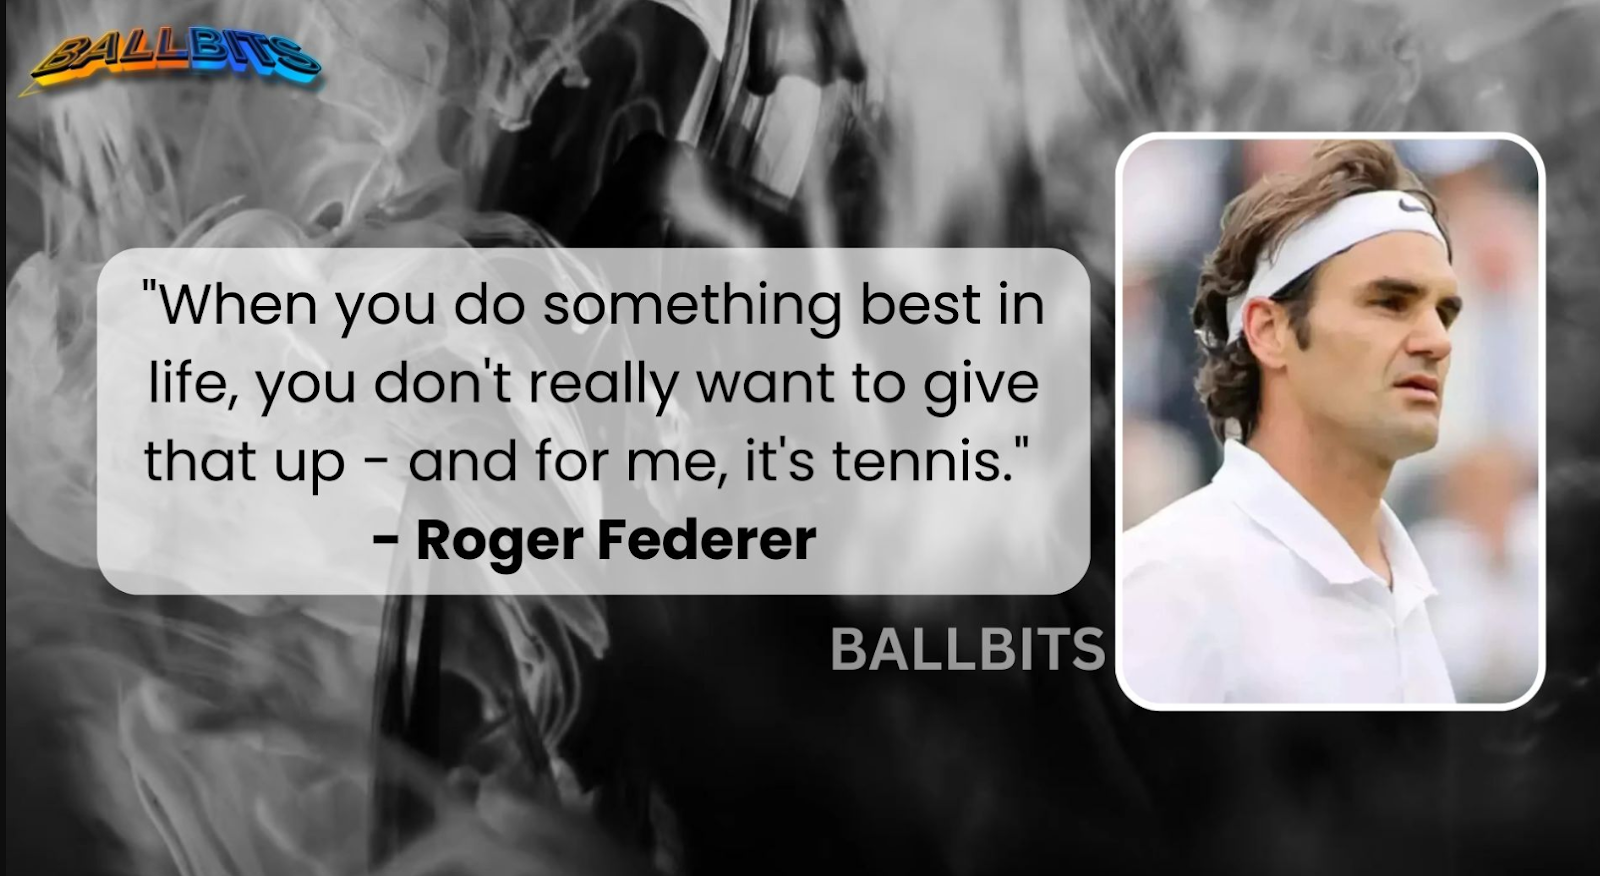 "When you do something best in life, you don't really want to give that up - and for me, it's tennis." - Roger Federer